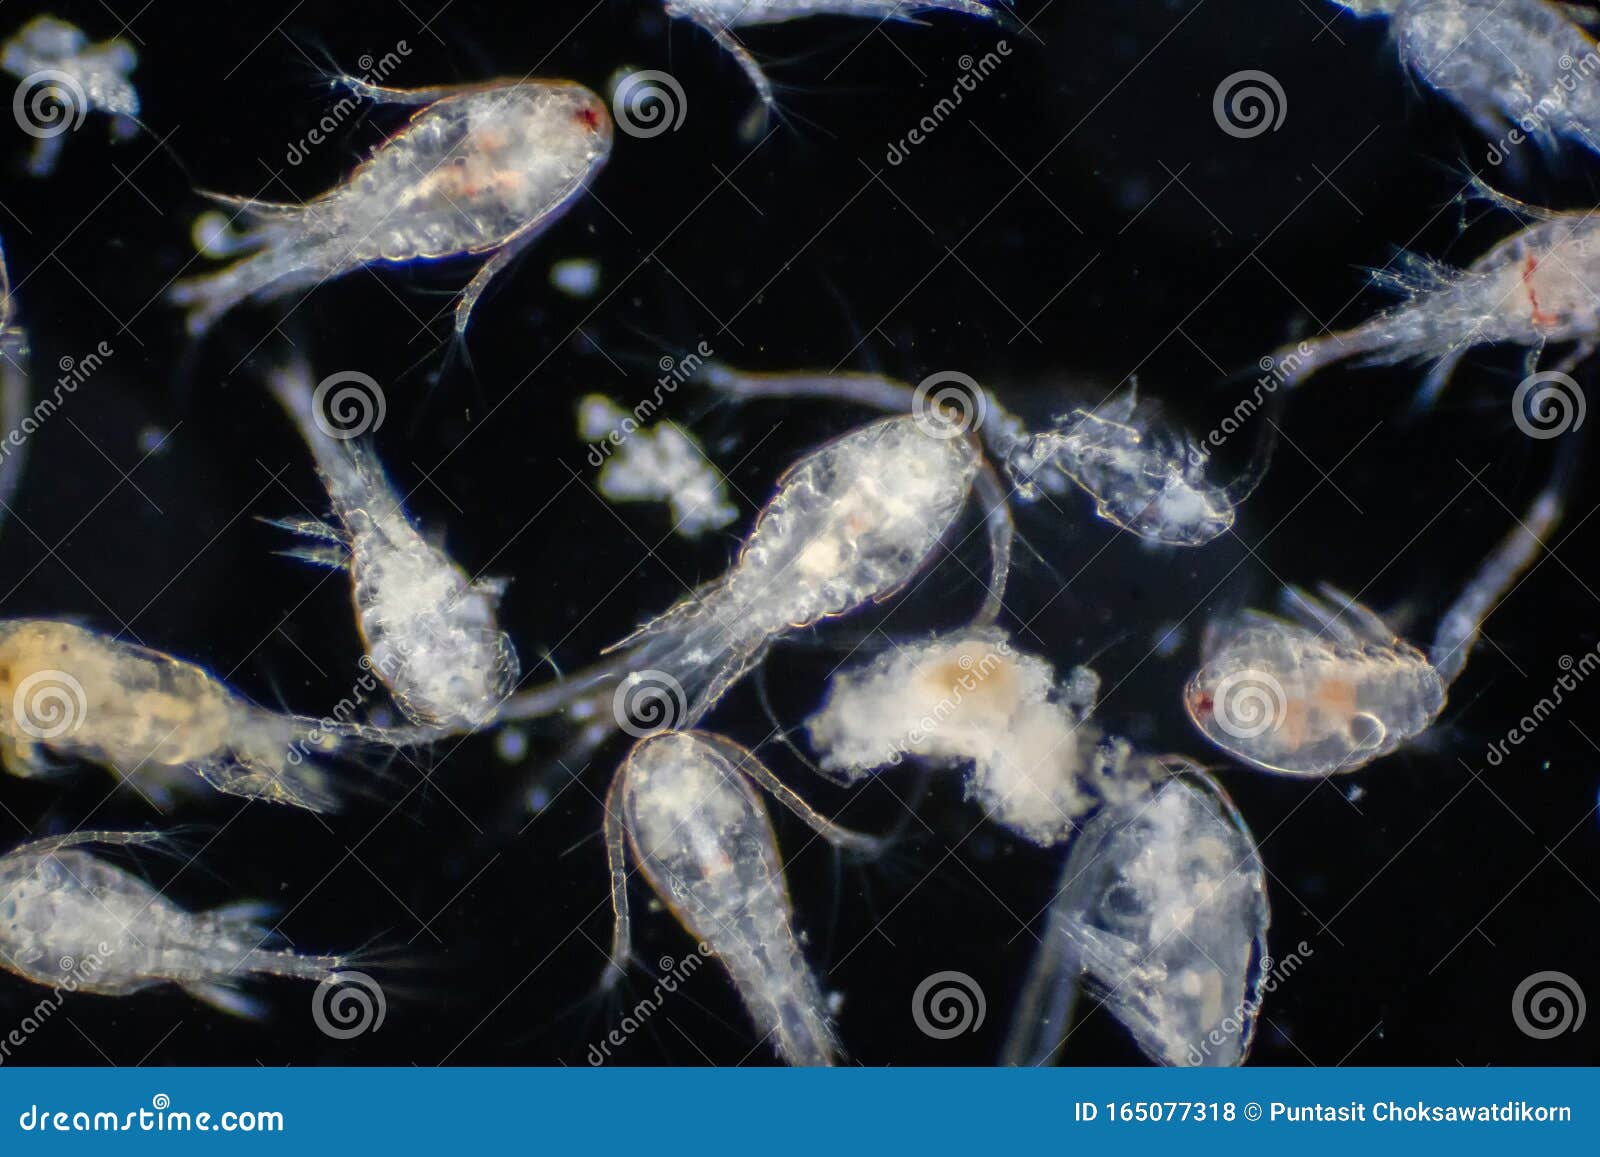 copepod zooplankton are a group of small crustaceans found in marine and freshwater habitat